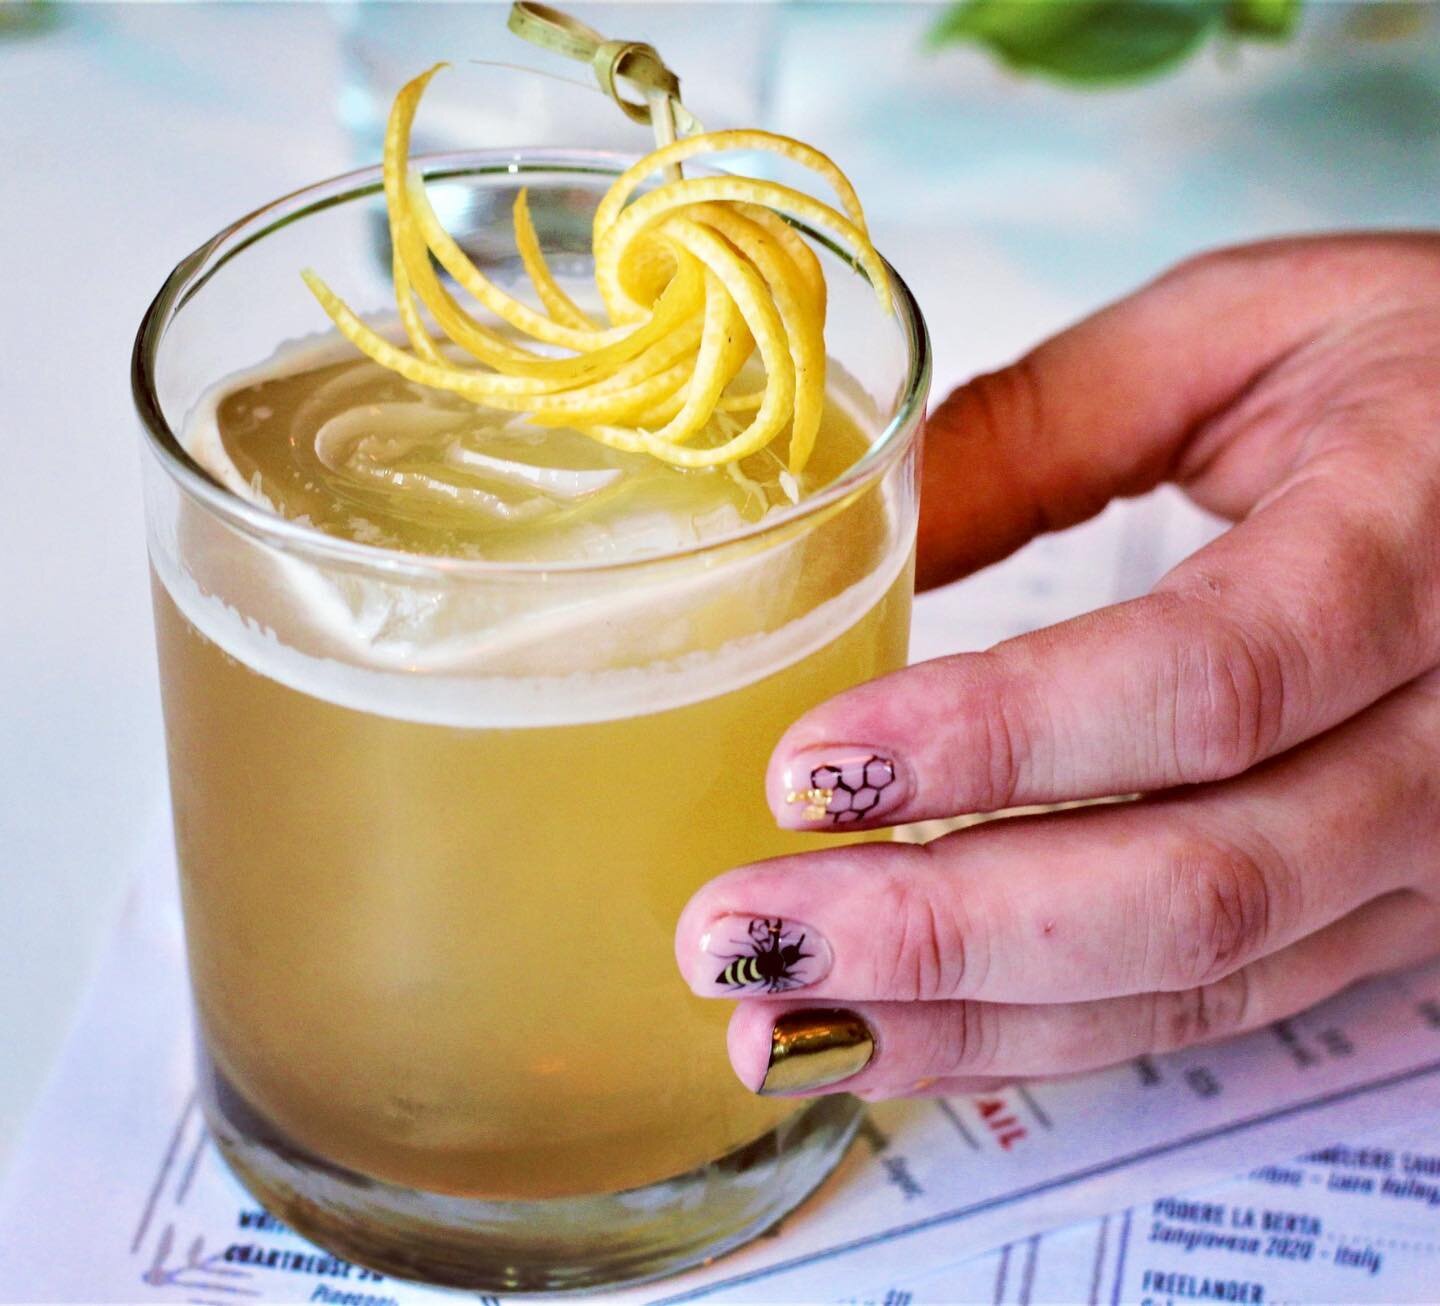 THE HUNNYBEE 🐝
Welcome September&rsquo;s Gin of the Month Cocktail! Featuring Barr Hill Tom Cat Gin, lemon, honey, &amp; Cocchi Americano #ginofthemonth #honeygin